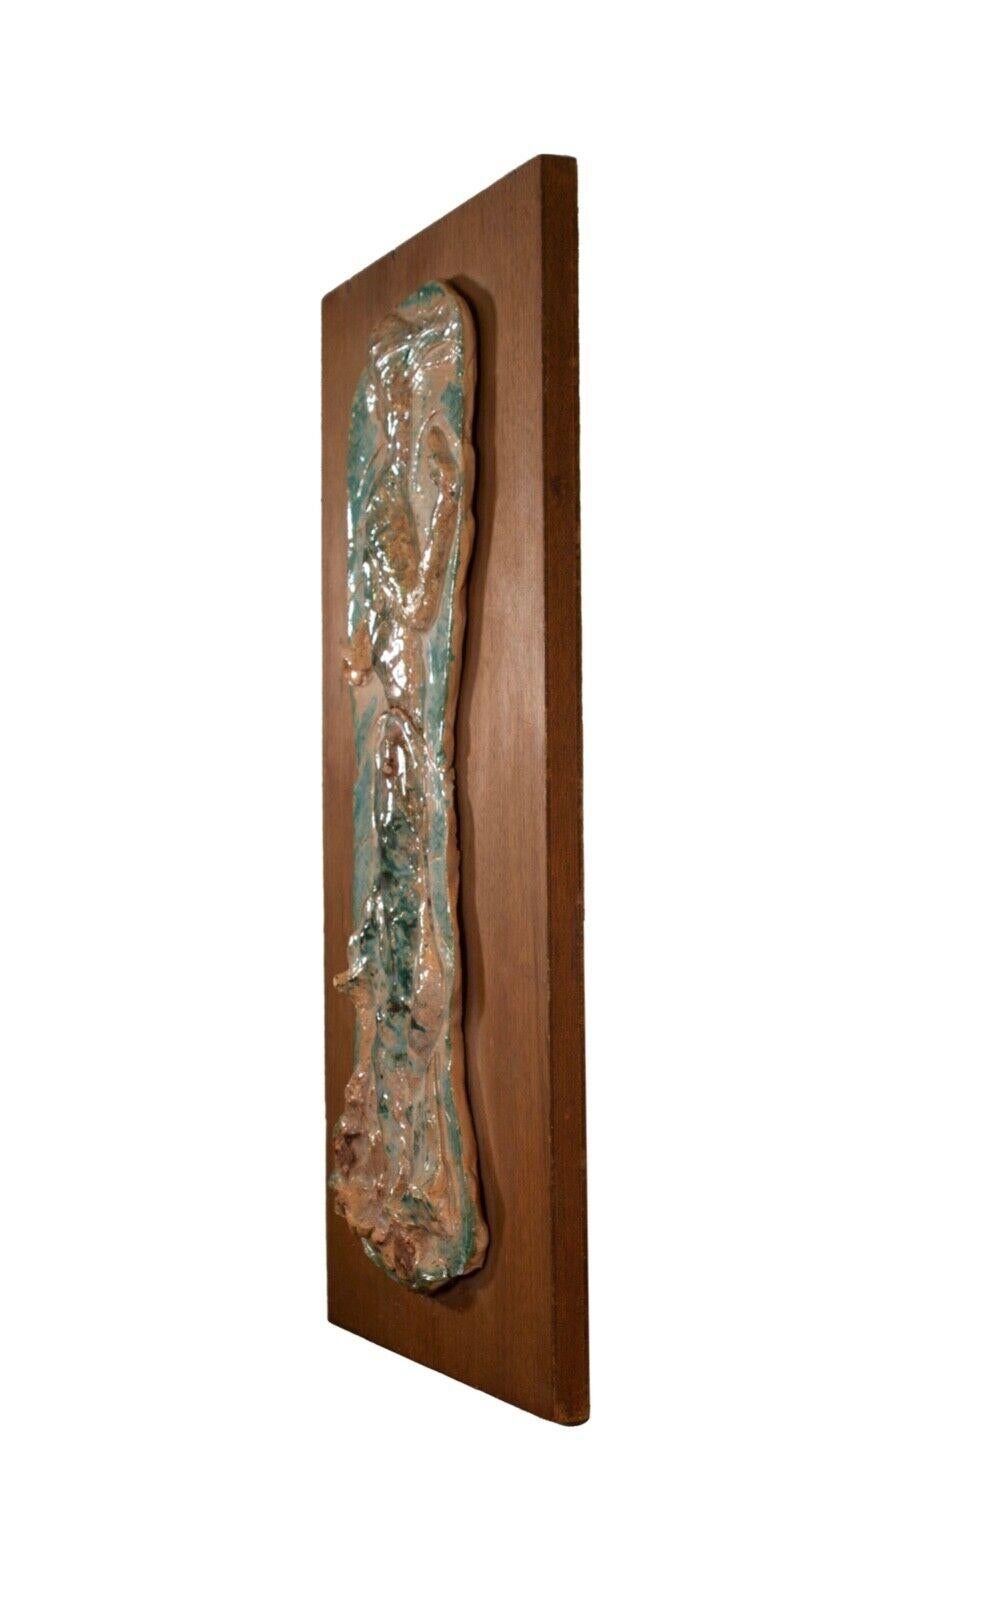 Emil Weddige Modernist Female Form Painted Ceramic Relief Sculpture on Board '60 In Good Condition For Sale In Keego Harbor, MI